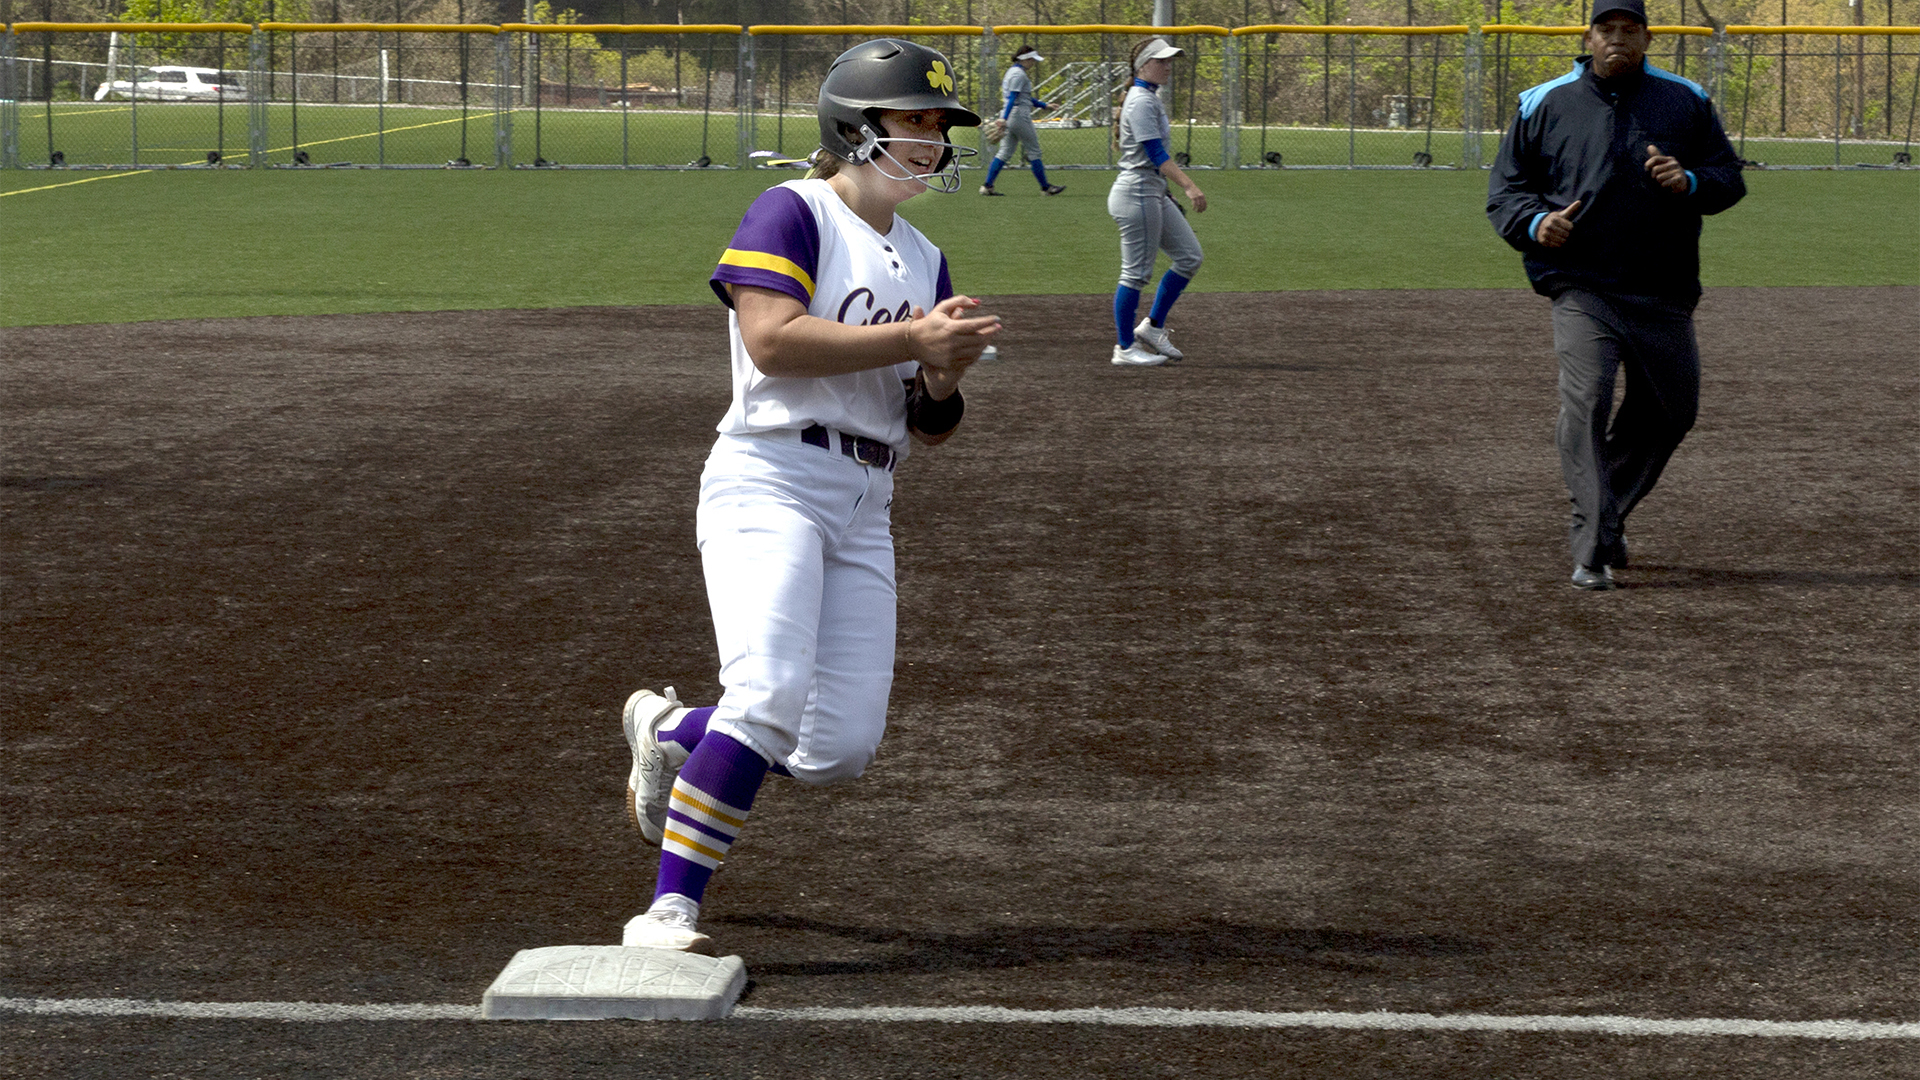 McKenna Pierce went 6 for 10 with two home runs and a double on the day. Photo by Robert Cifone.